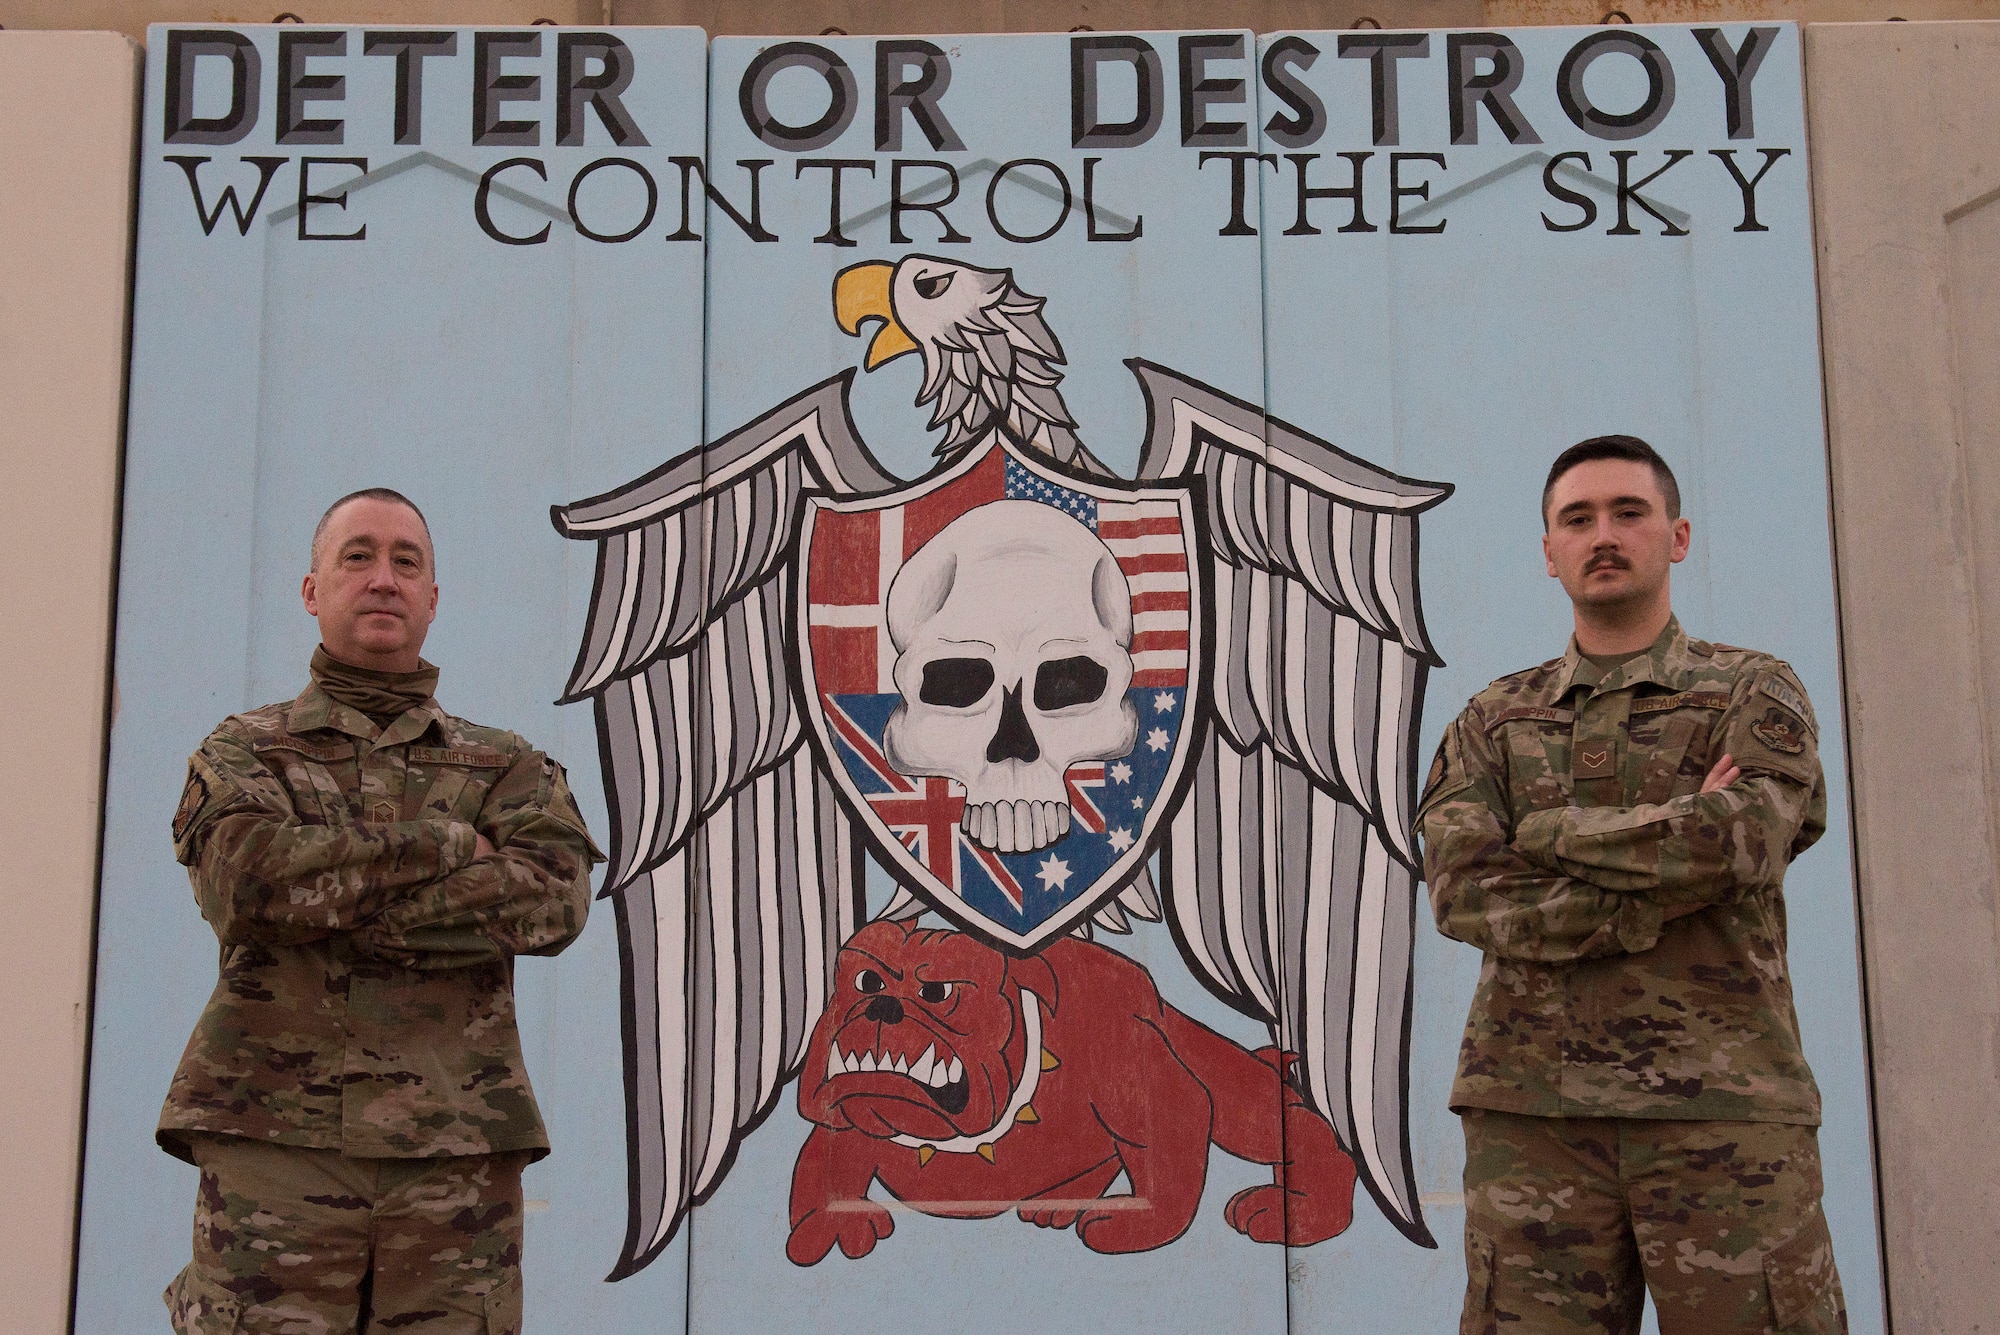 U.S. Air Force Master Sgt. Heath McCoppin, 727th Expeditionary Air Control Squadron air surveillance and electronic protection technician (left), and Senior Airman Garrett McCoppin, 727th EACS cyber operations technician (right), pose for a photo at Al Dhafra Air Base, United Arab Emirates, Jan. 25, 2021.